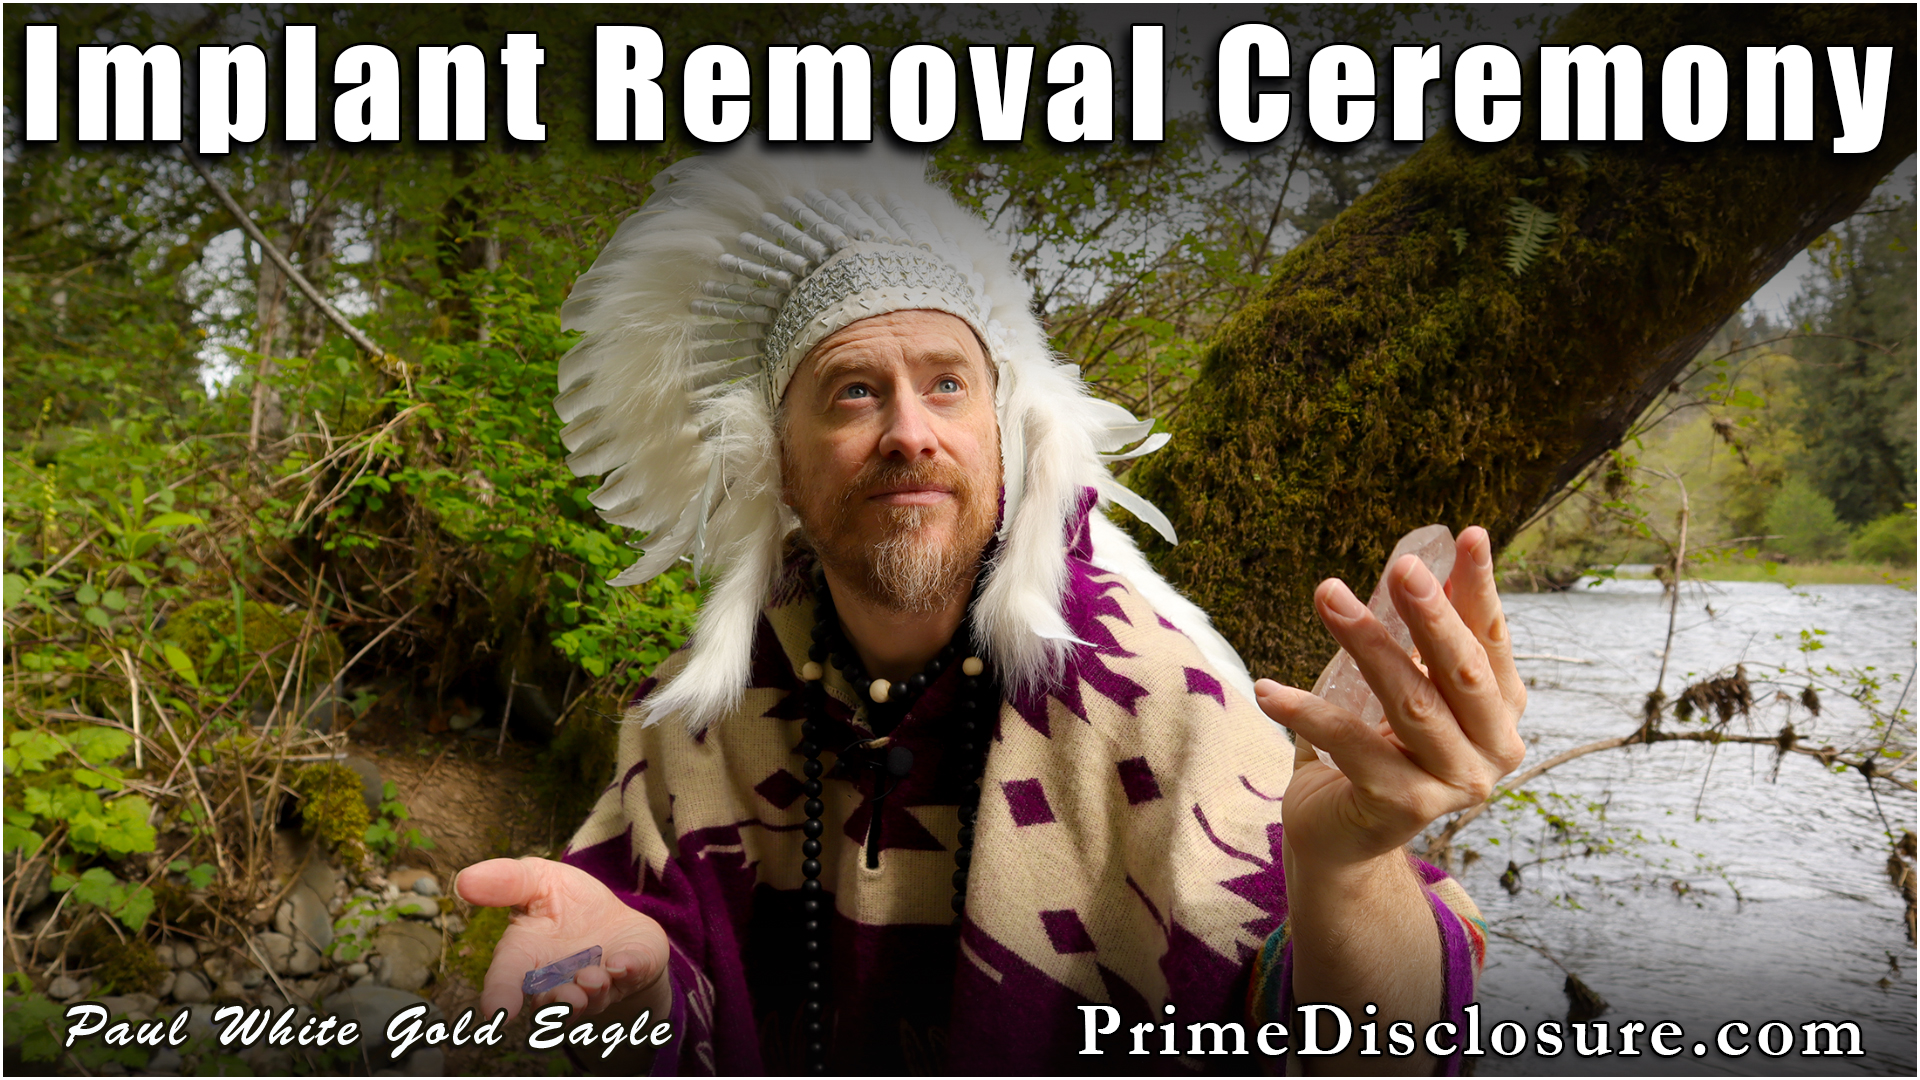 implant-removal-ceremony